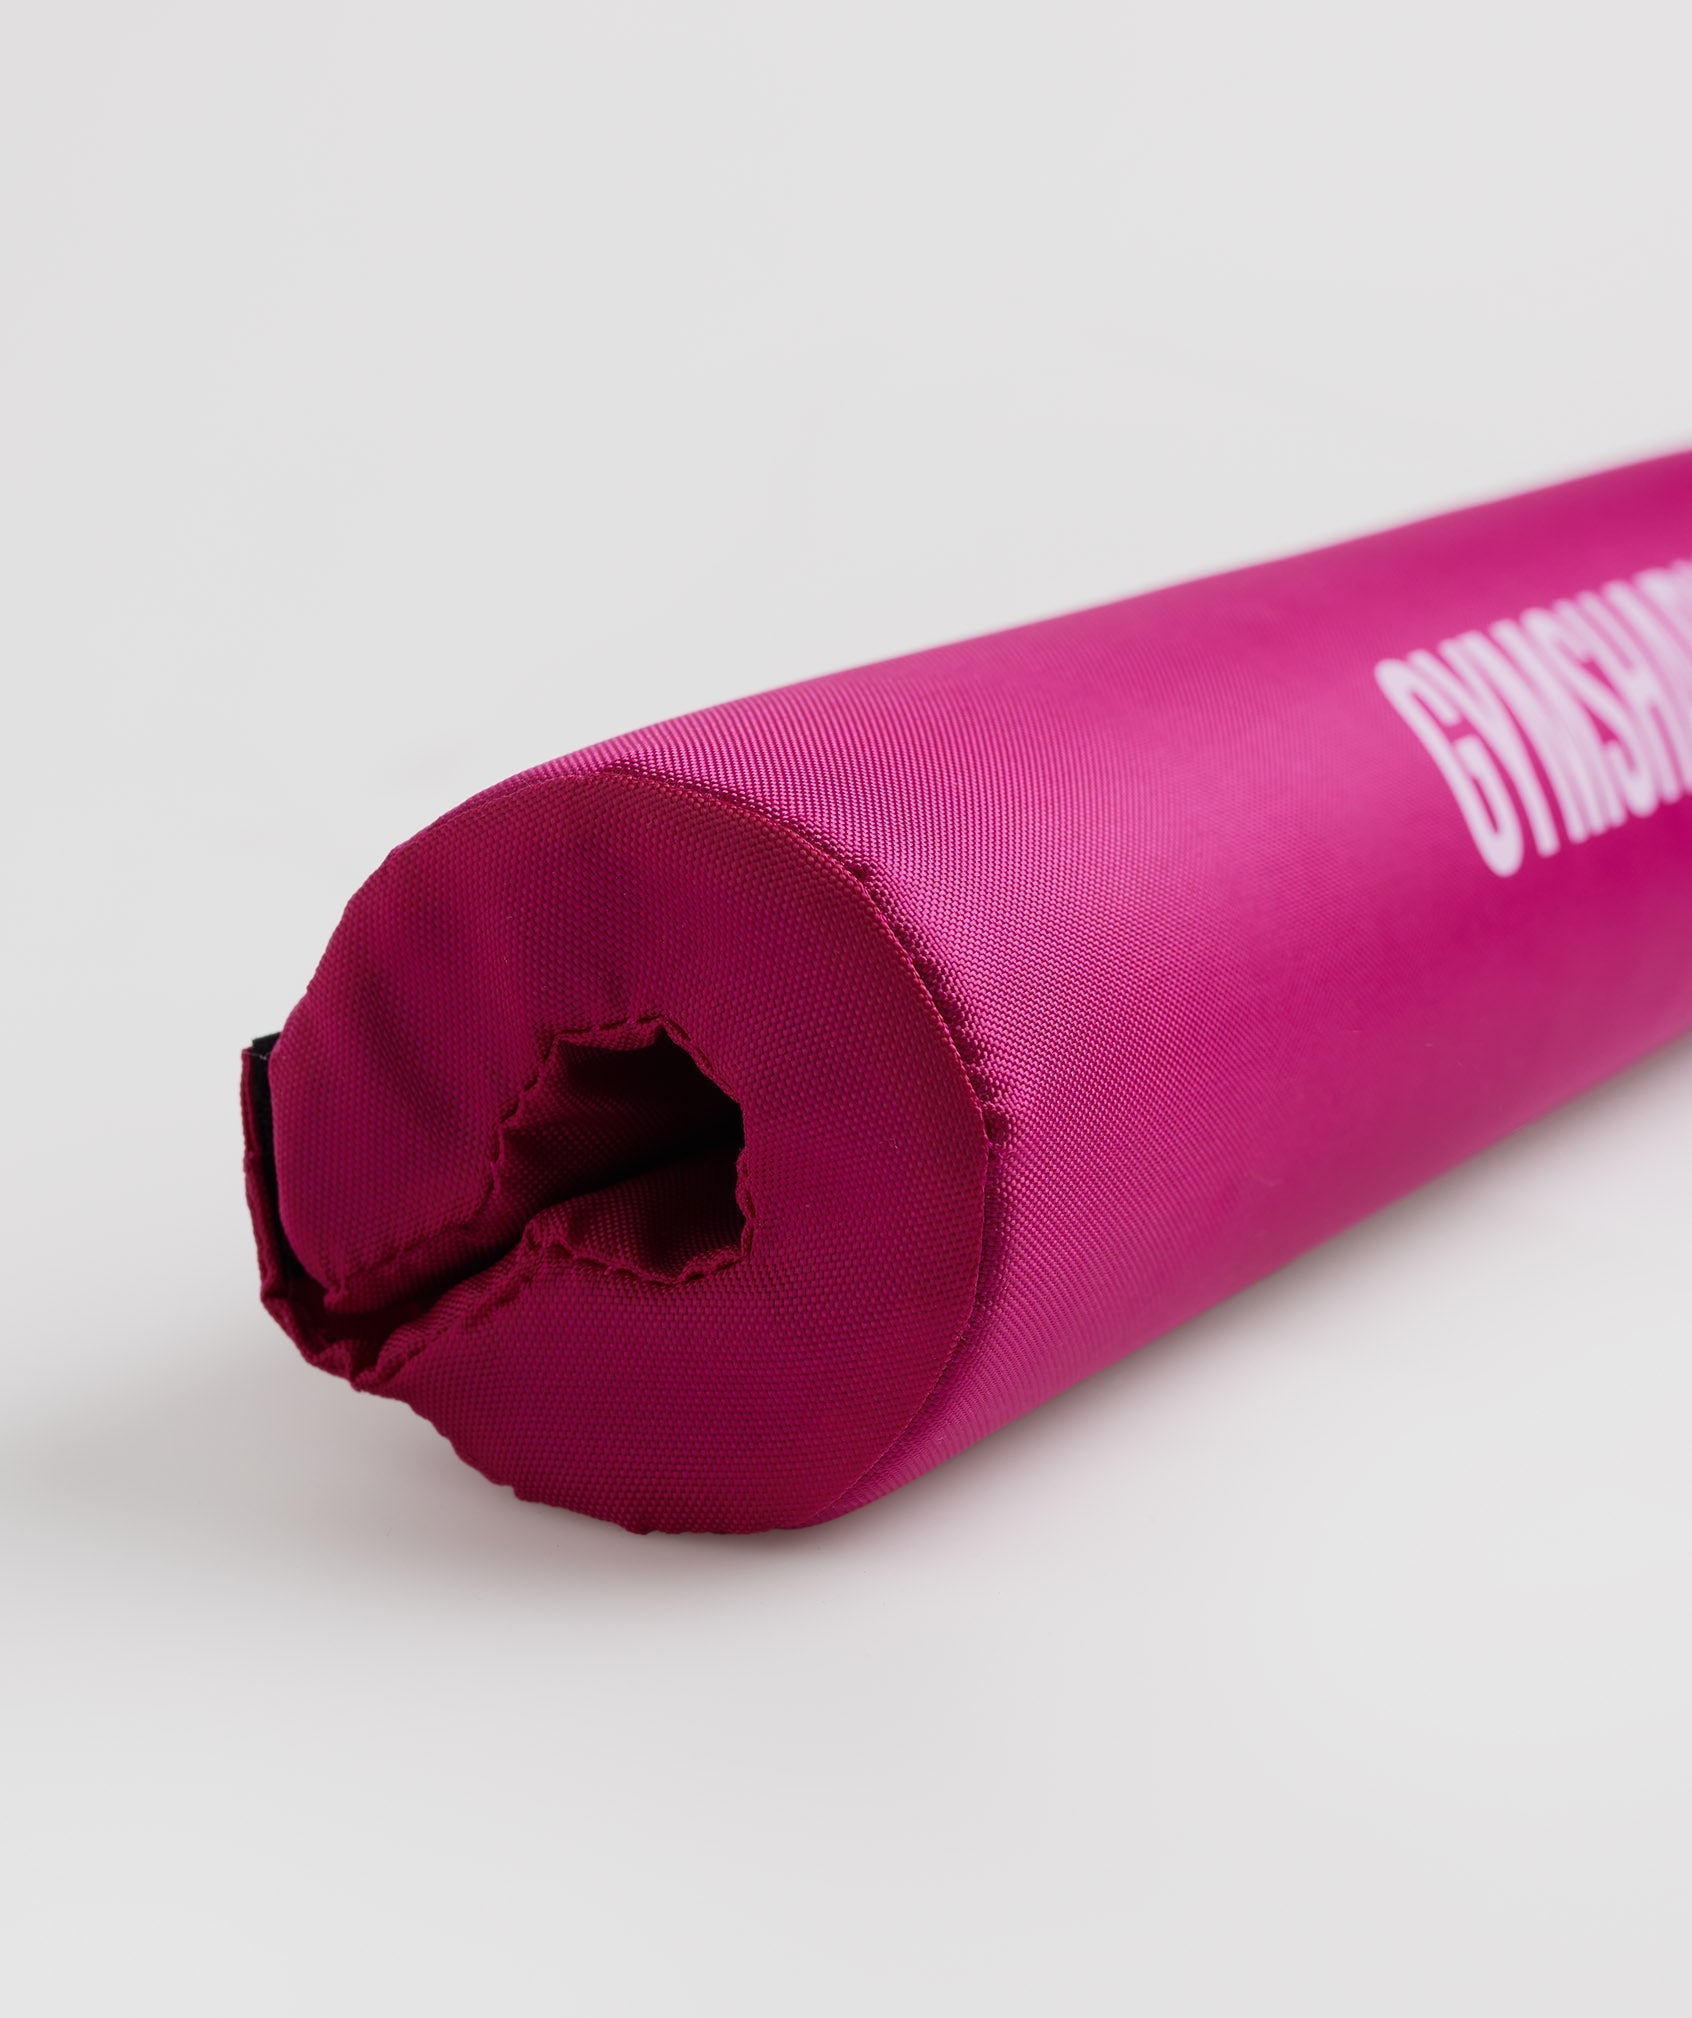 Barbell Pad in Magenta Pink - view 4